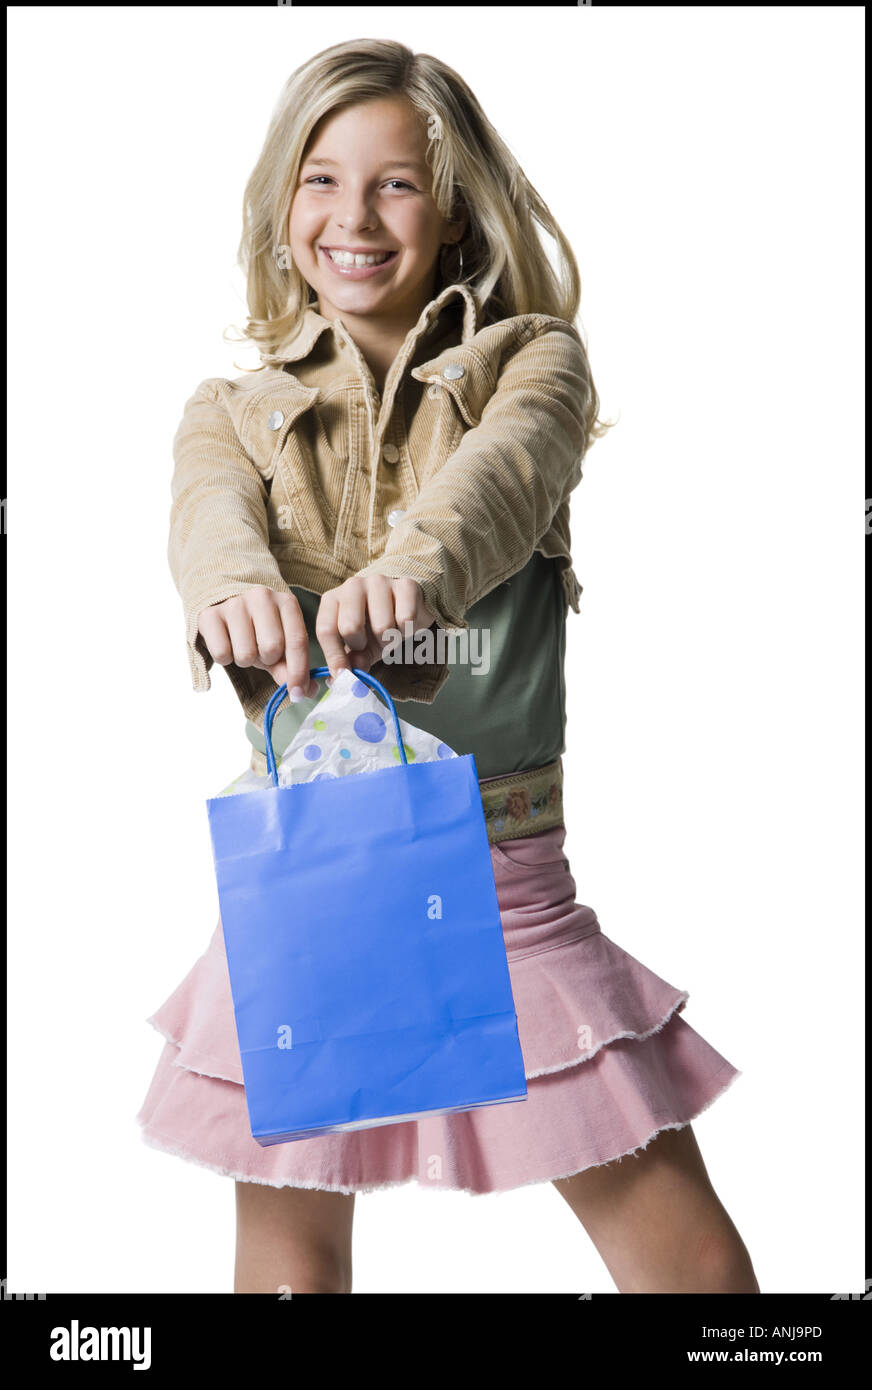 Portrait of a girl showing a shopping bag and smiling Stock Photo